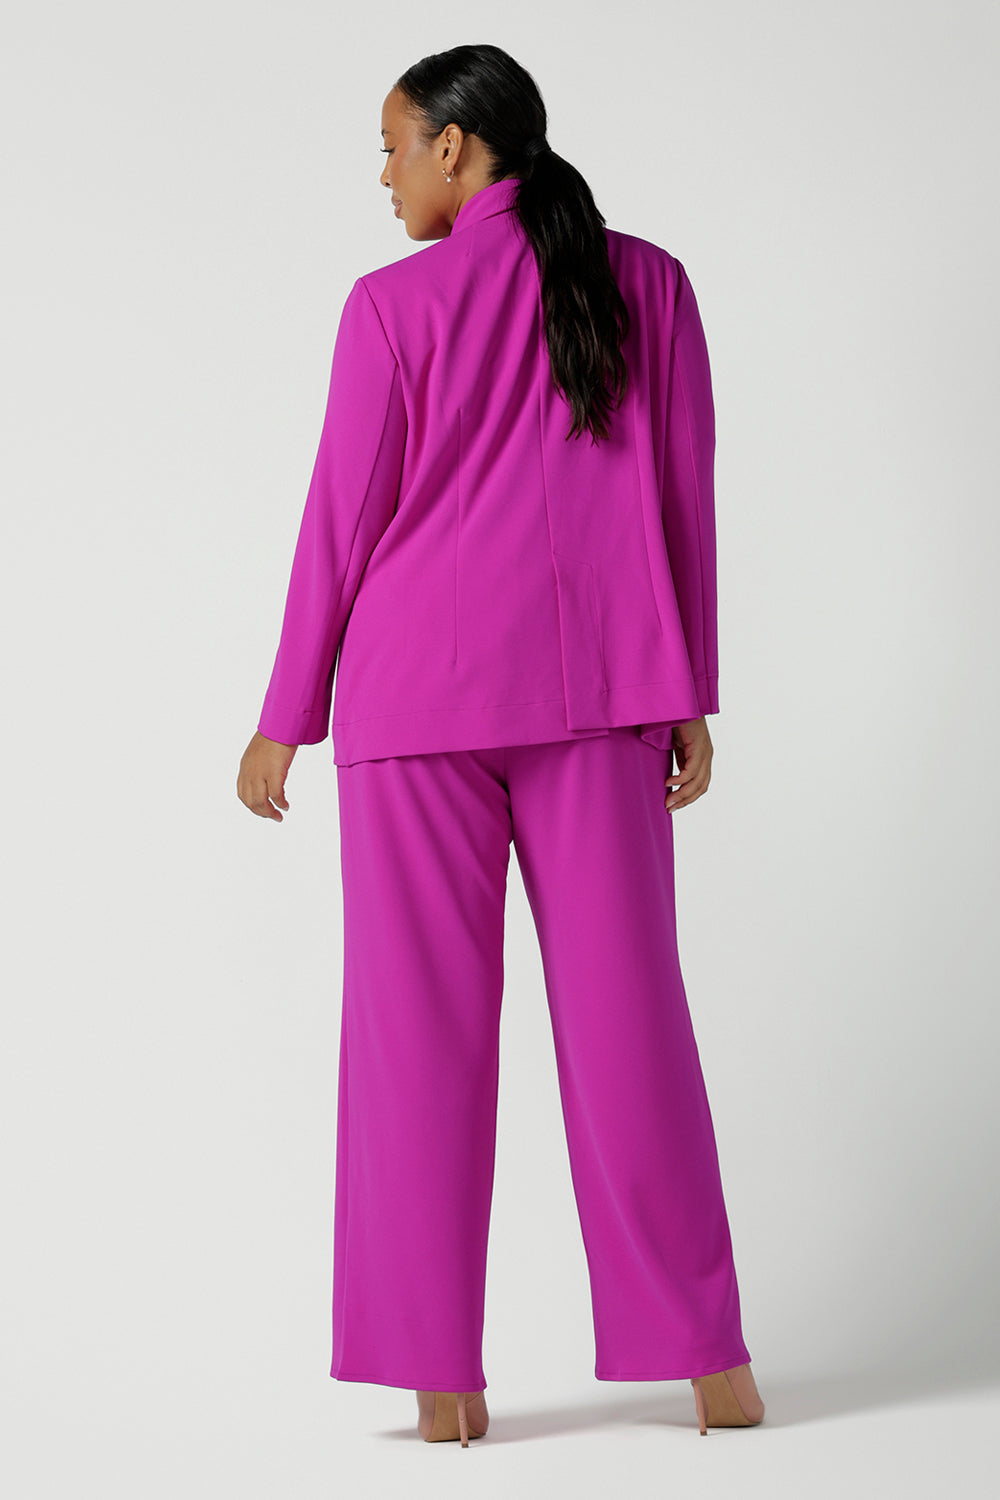 Back view of a size 16 woman wears a fuchsia Merit Blazer in scuba crepe. Tailored design with self covered buttons, shawl collar and curved hem and pockets. Size inclusive for stylish corporate workwear for women. Size 8 - 24.